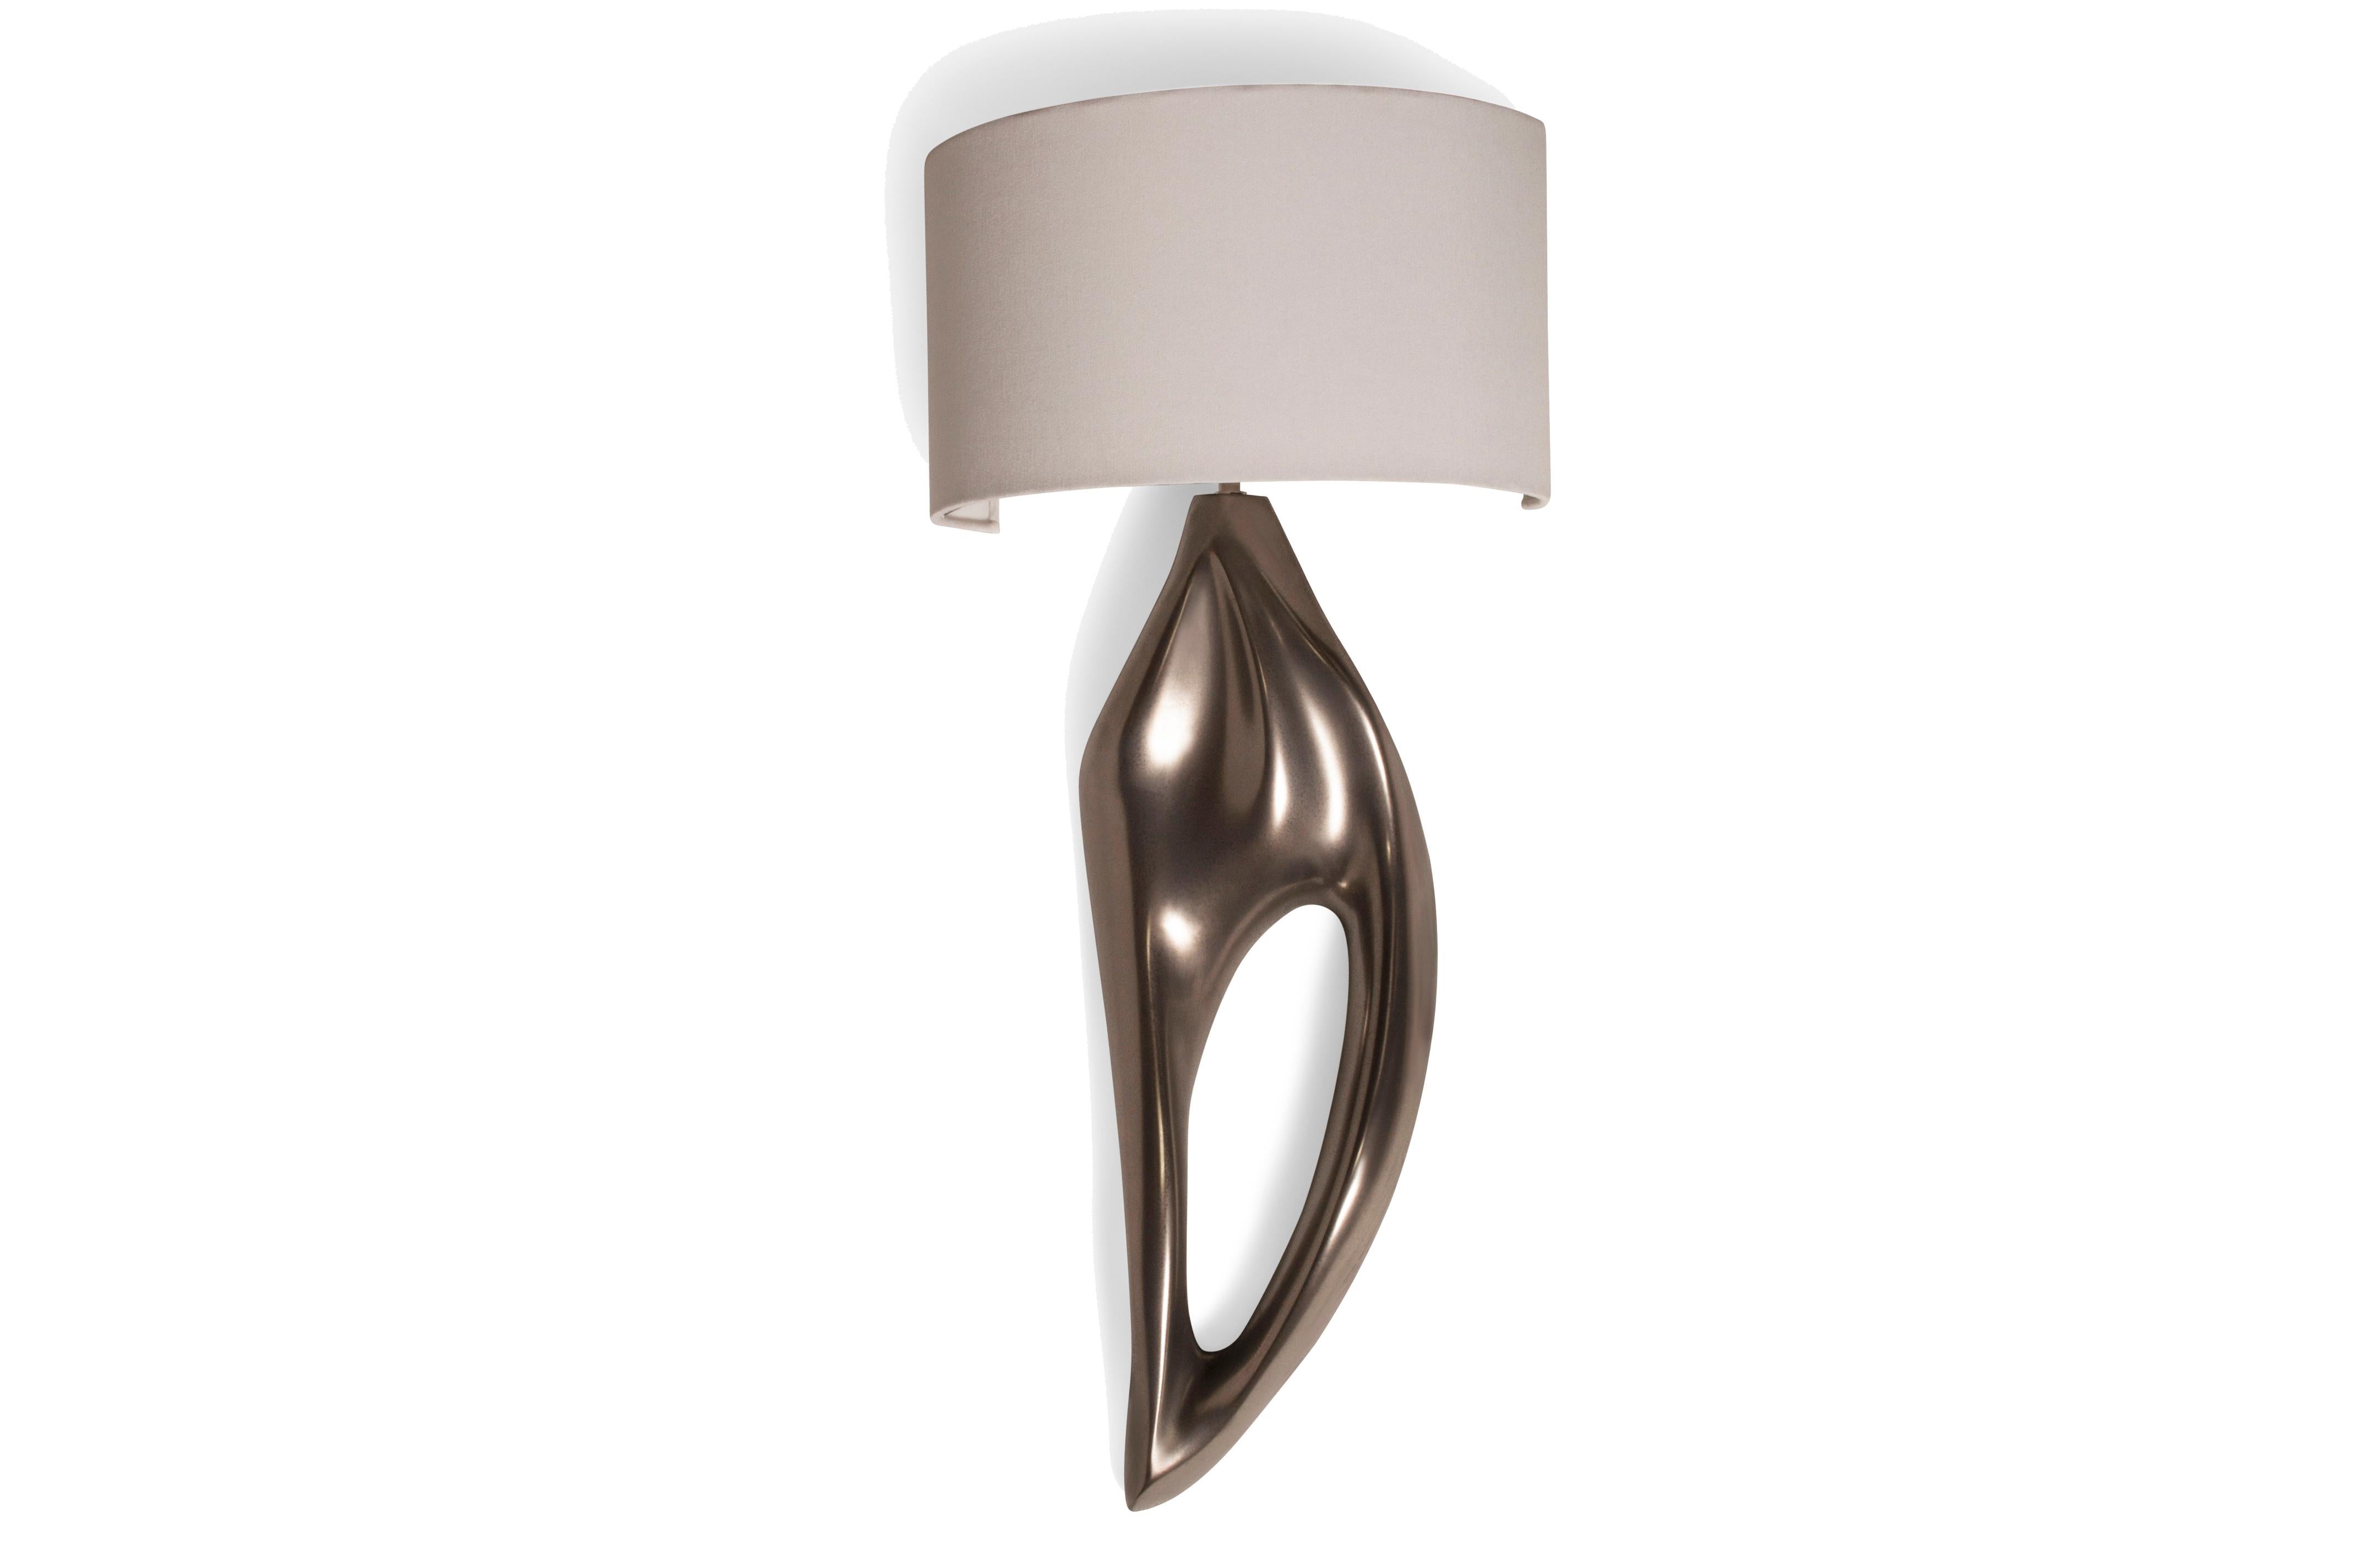 Oralee sconces is from solid walnut wood and stained natural. 
Shade dimensions: 12